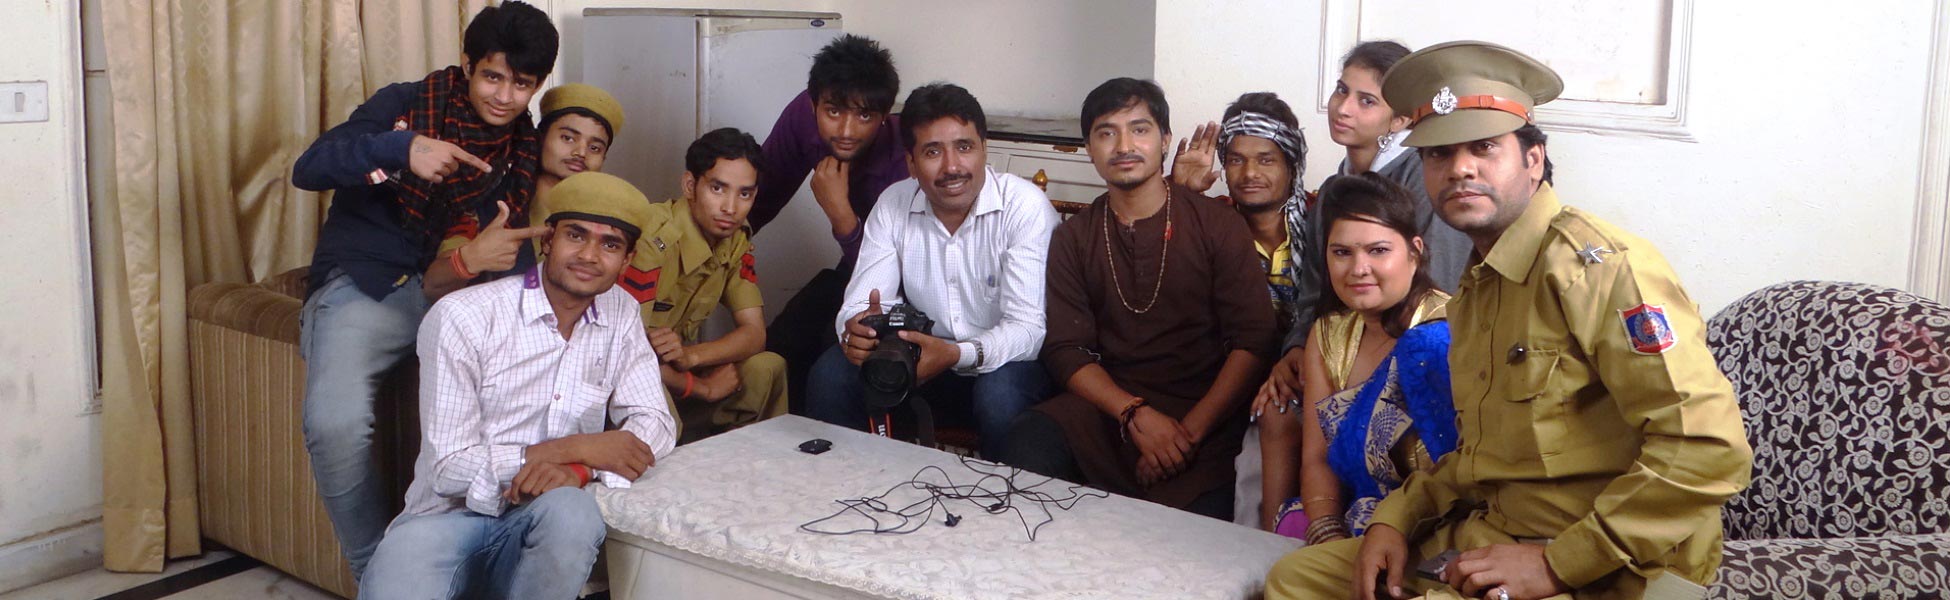 film production house in myanmar, video production house in myanmar, tv production house in myanmar, production house in myanmar, film production company in myanmar, video production company in myanmar, tv production company in myanmar, production company in myanmar